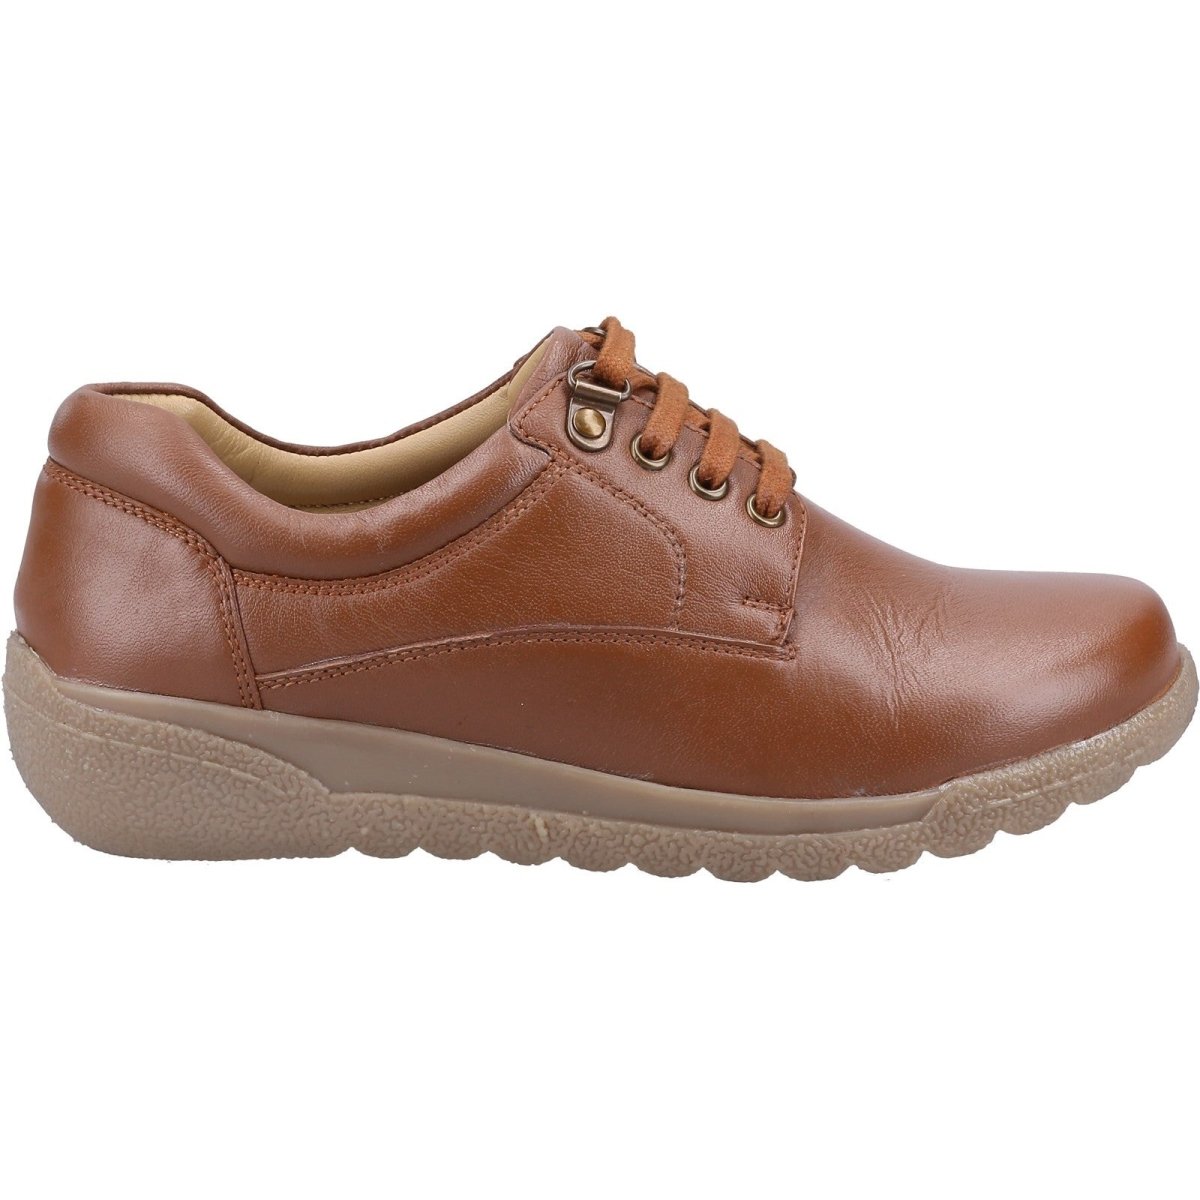 Fleet & Foster Cathy Ladies Leather Waterproof Shoes - Shoe Store Direct